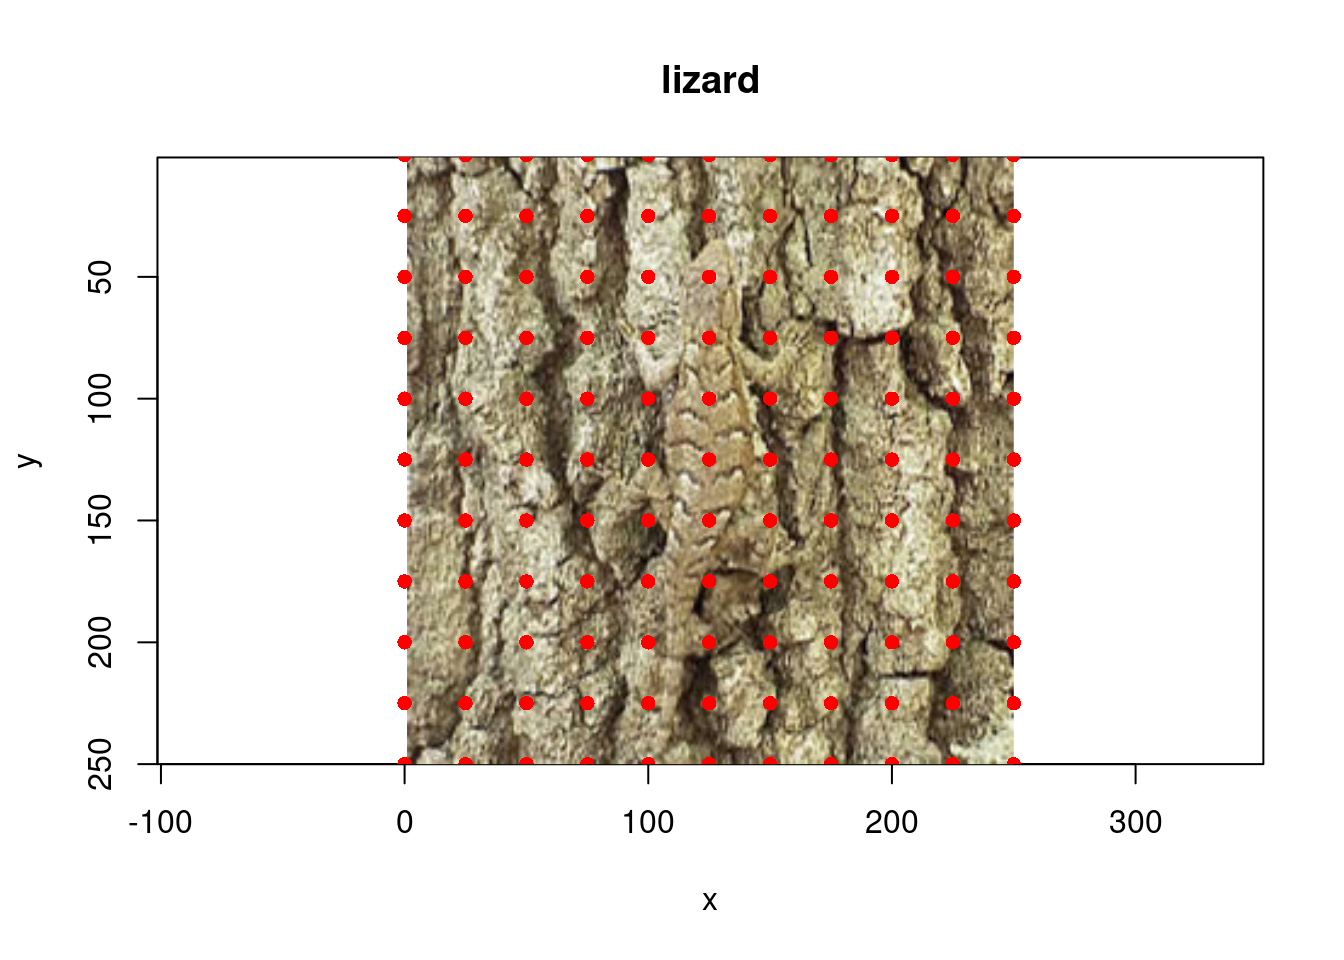 A cryptic lizard, along with a possible sampling grid for spectral measurement.